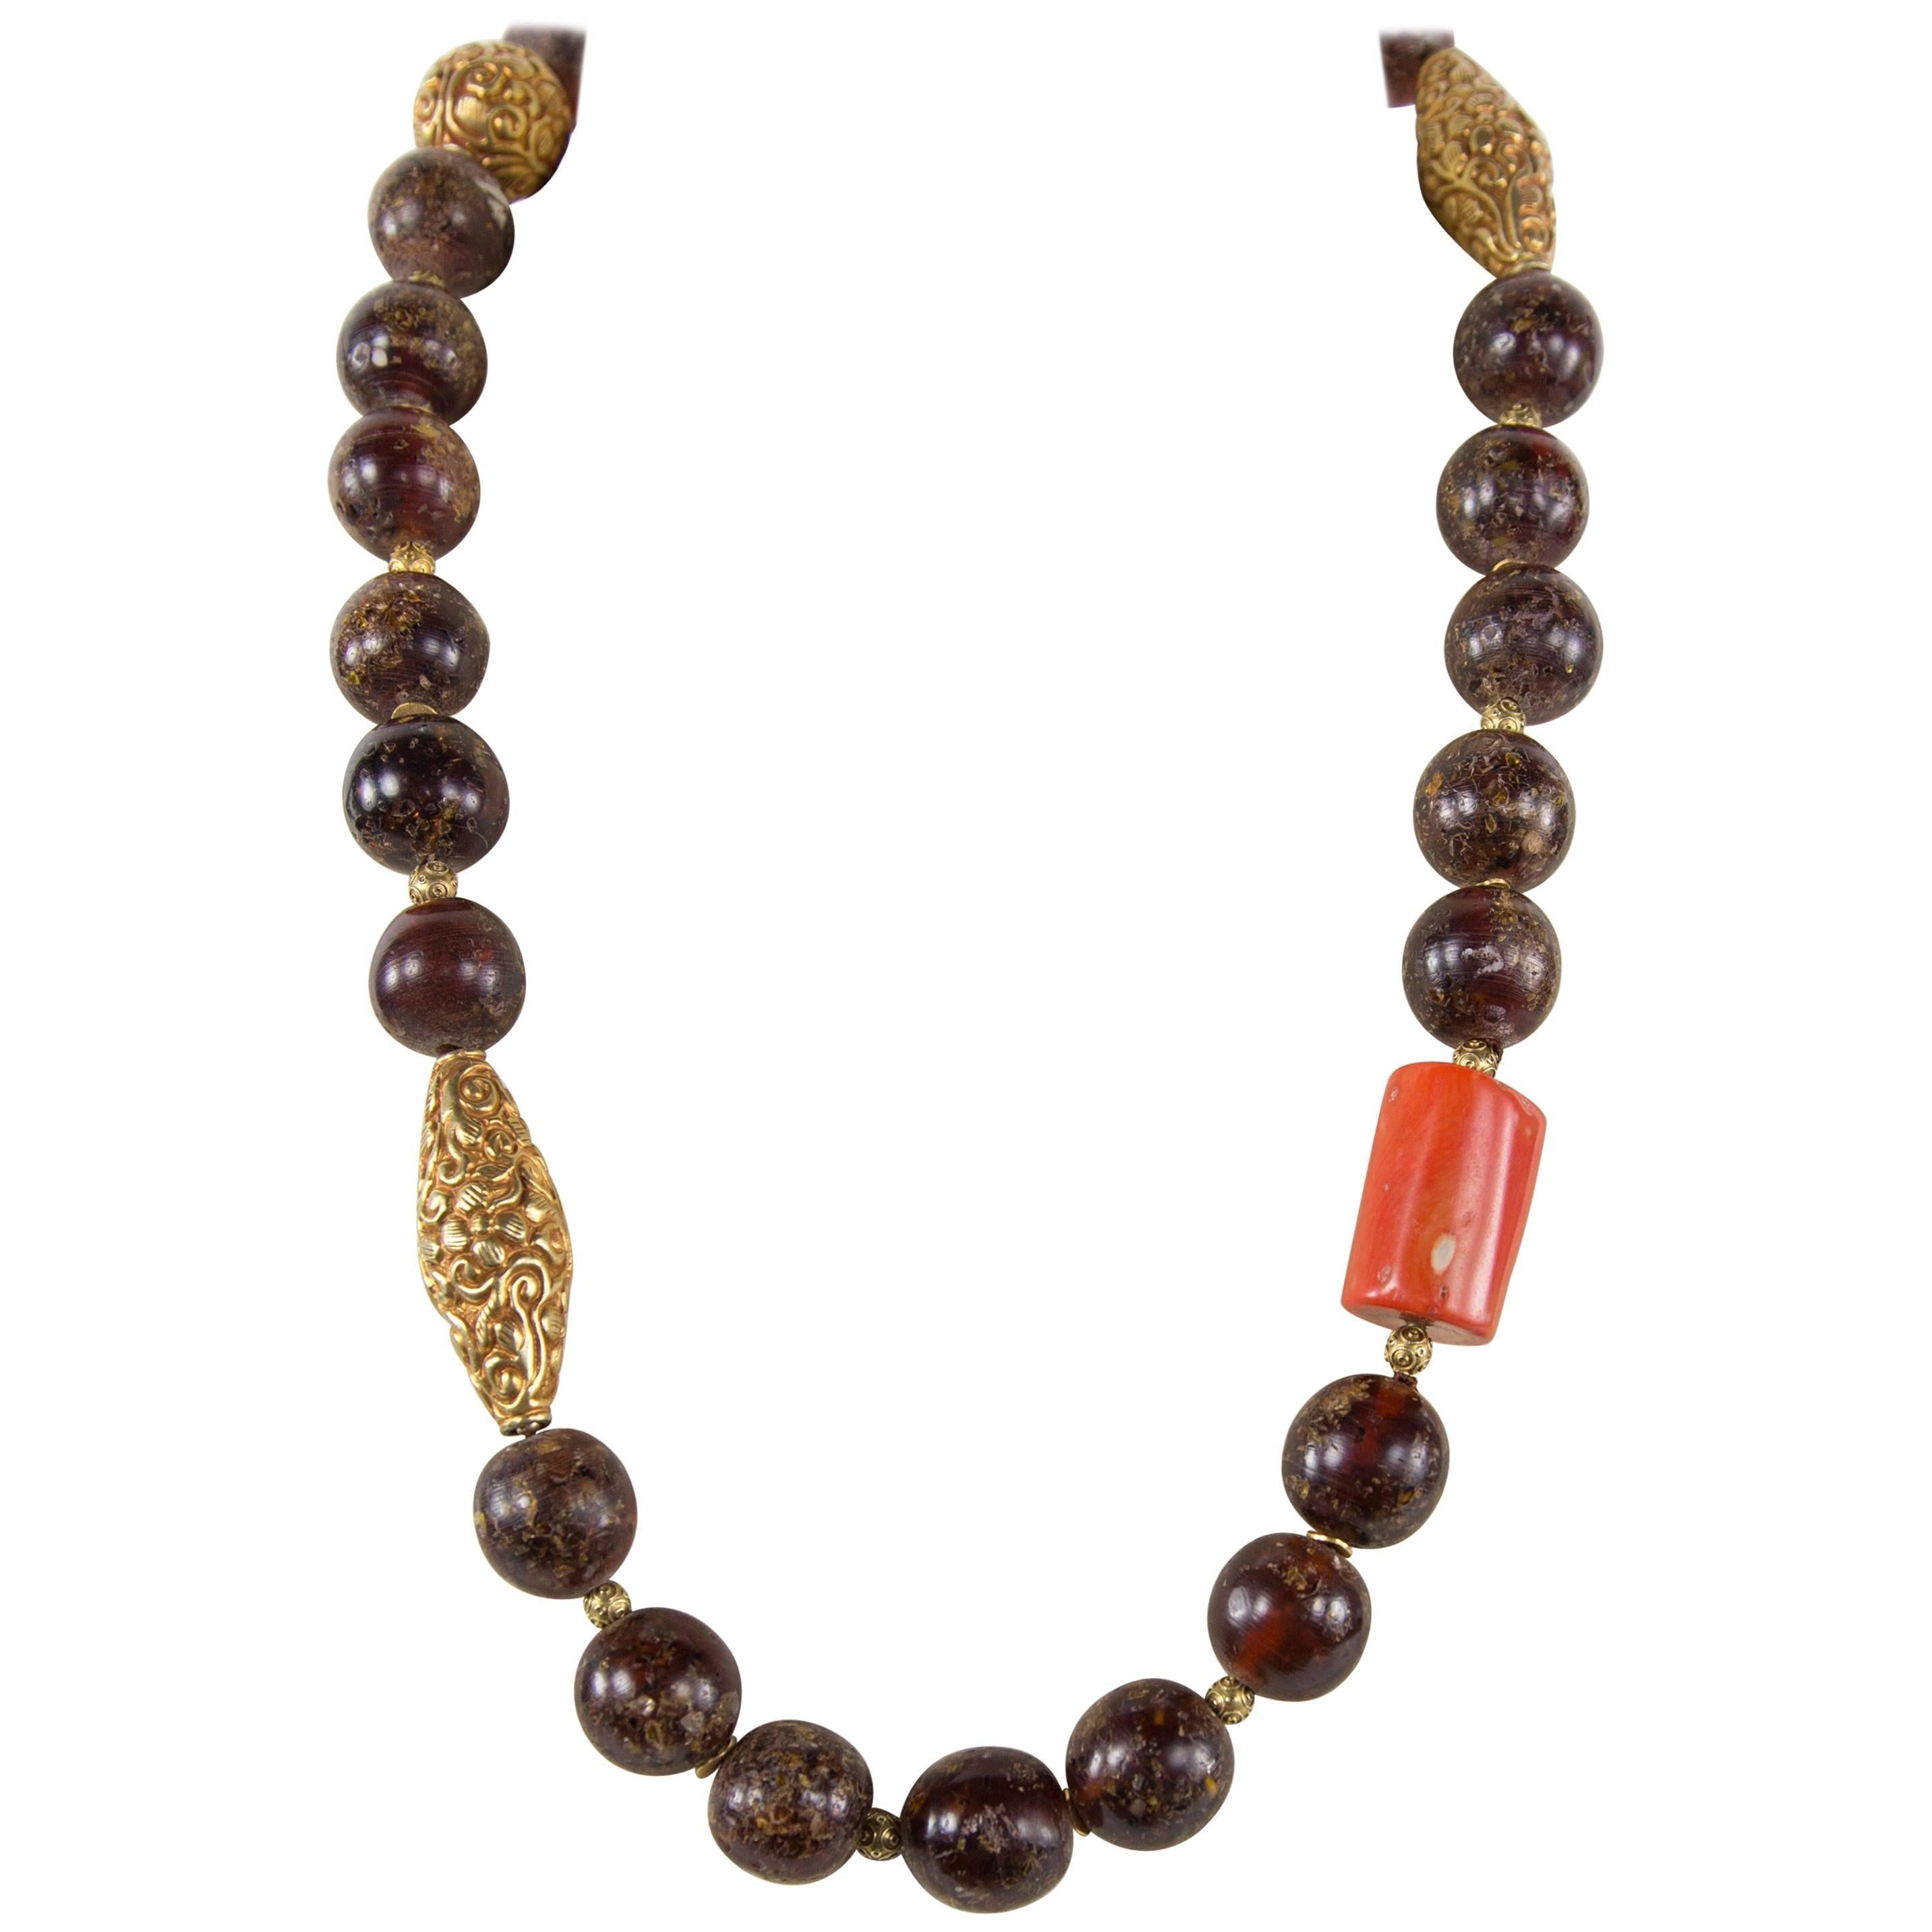 What is the meaning of coral beads?